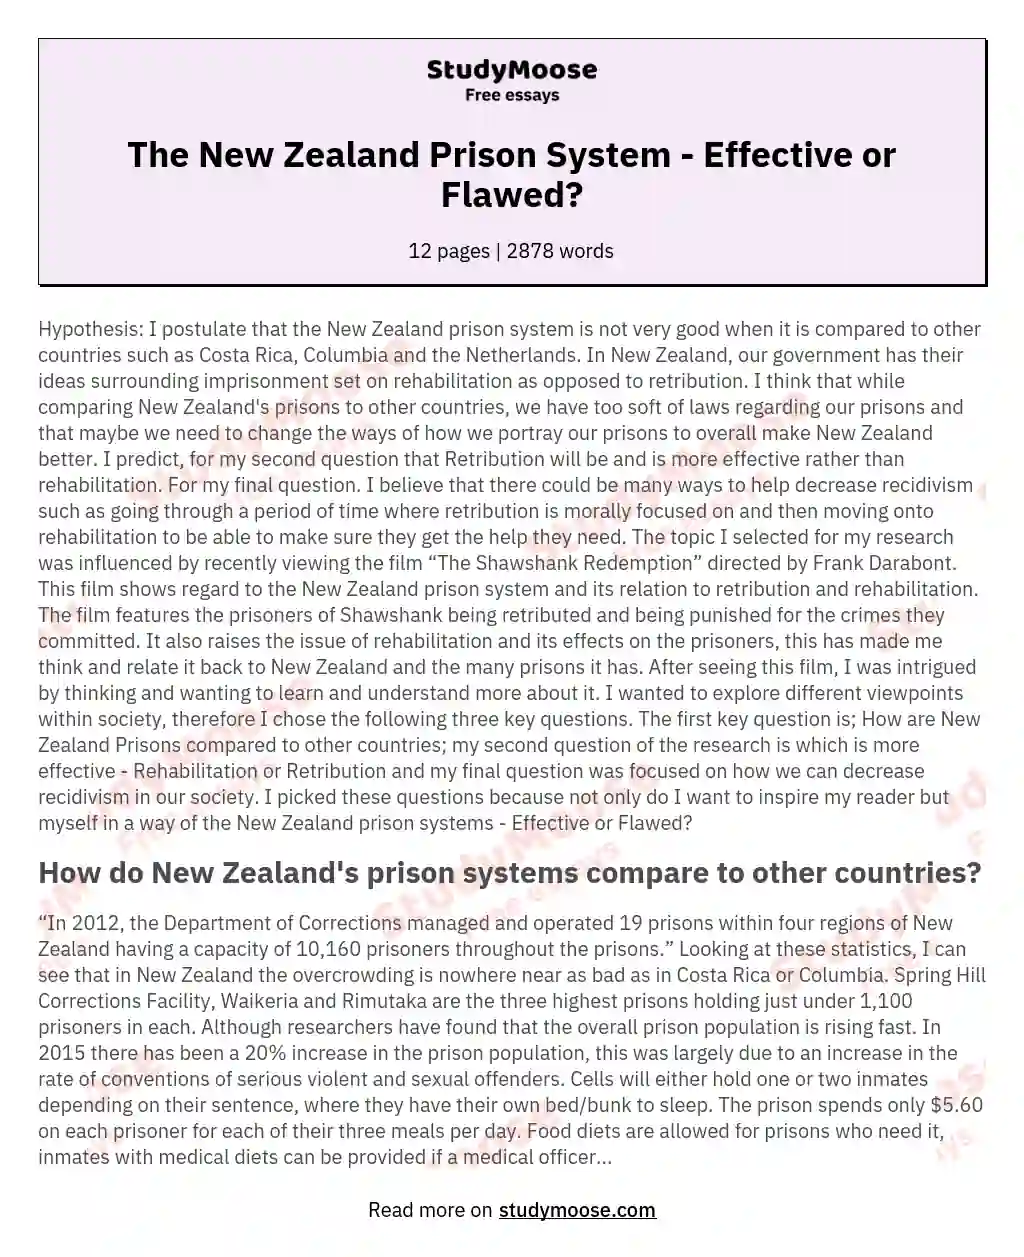 The New Zealand Prison System - Effective or Flawed? essay